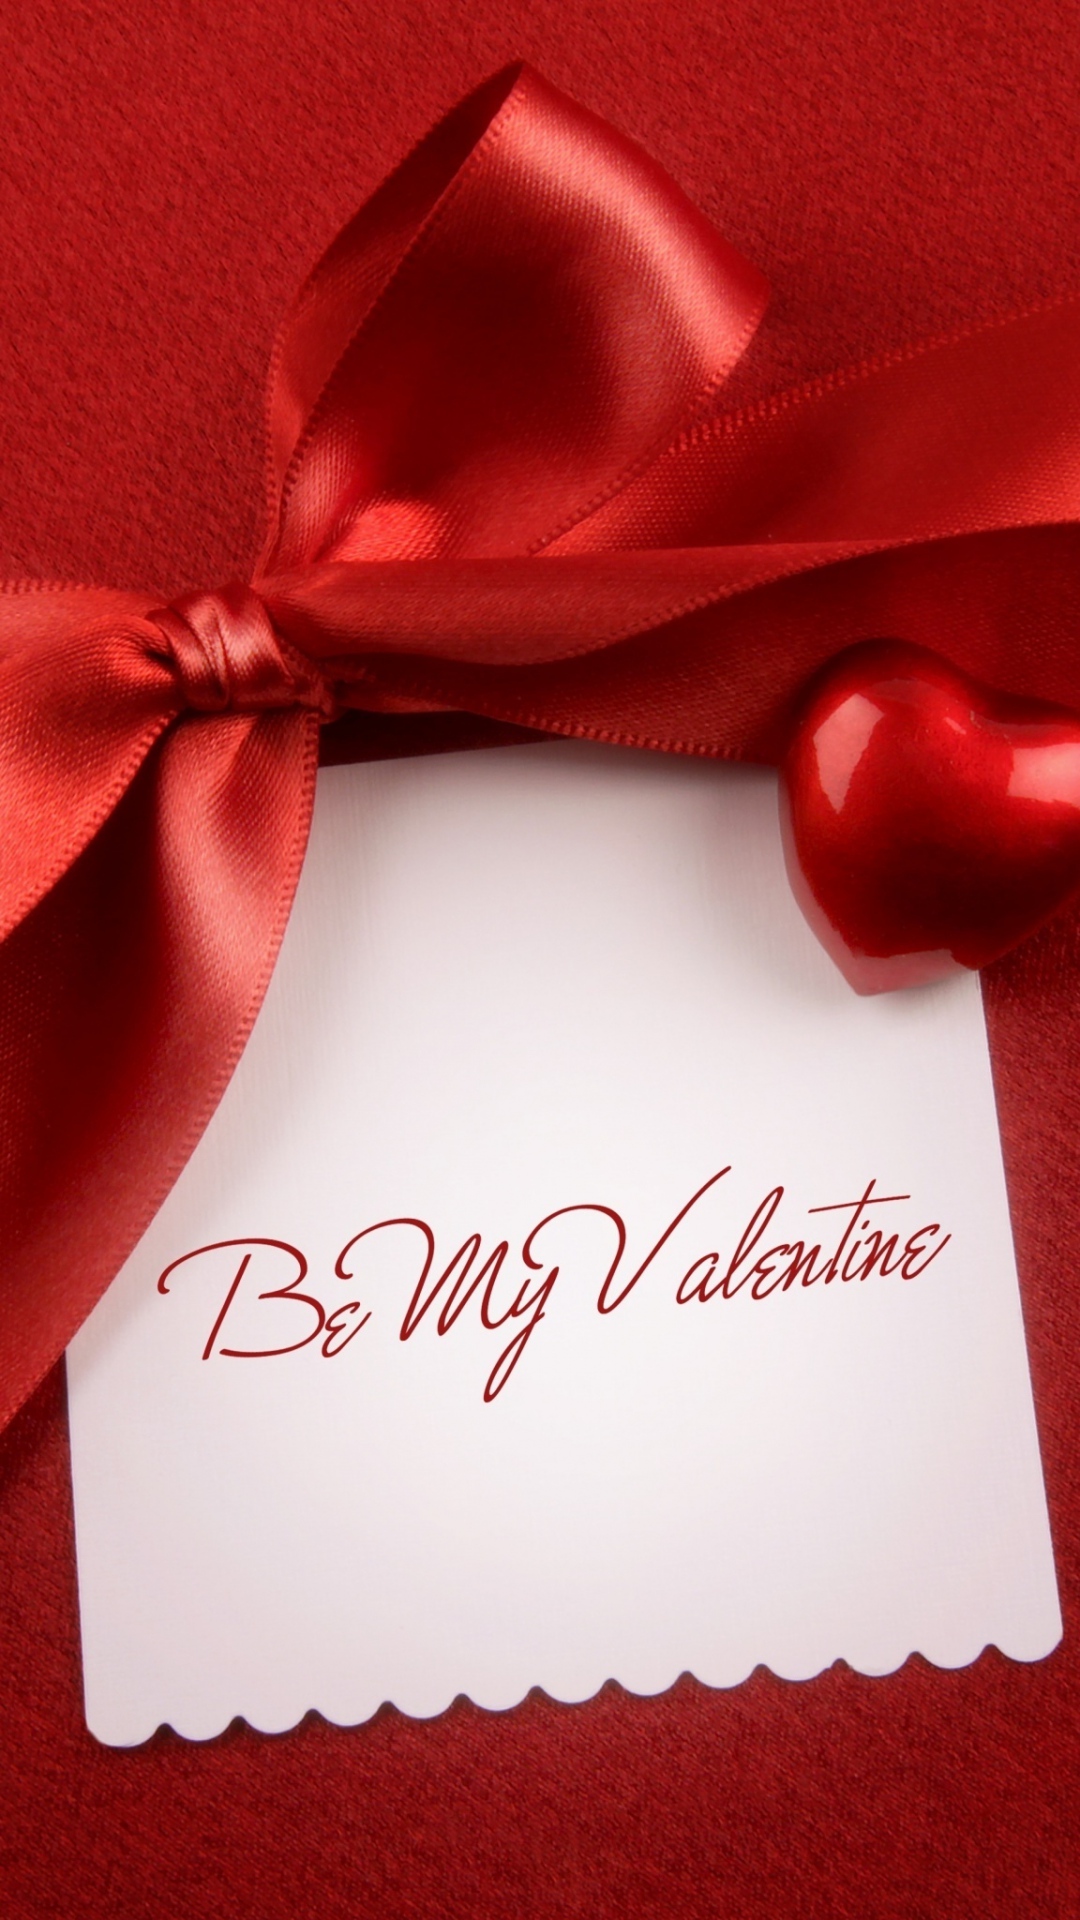 Be My Valentine Note iPhone 6 Plus HD Wallpaper